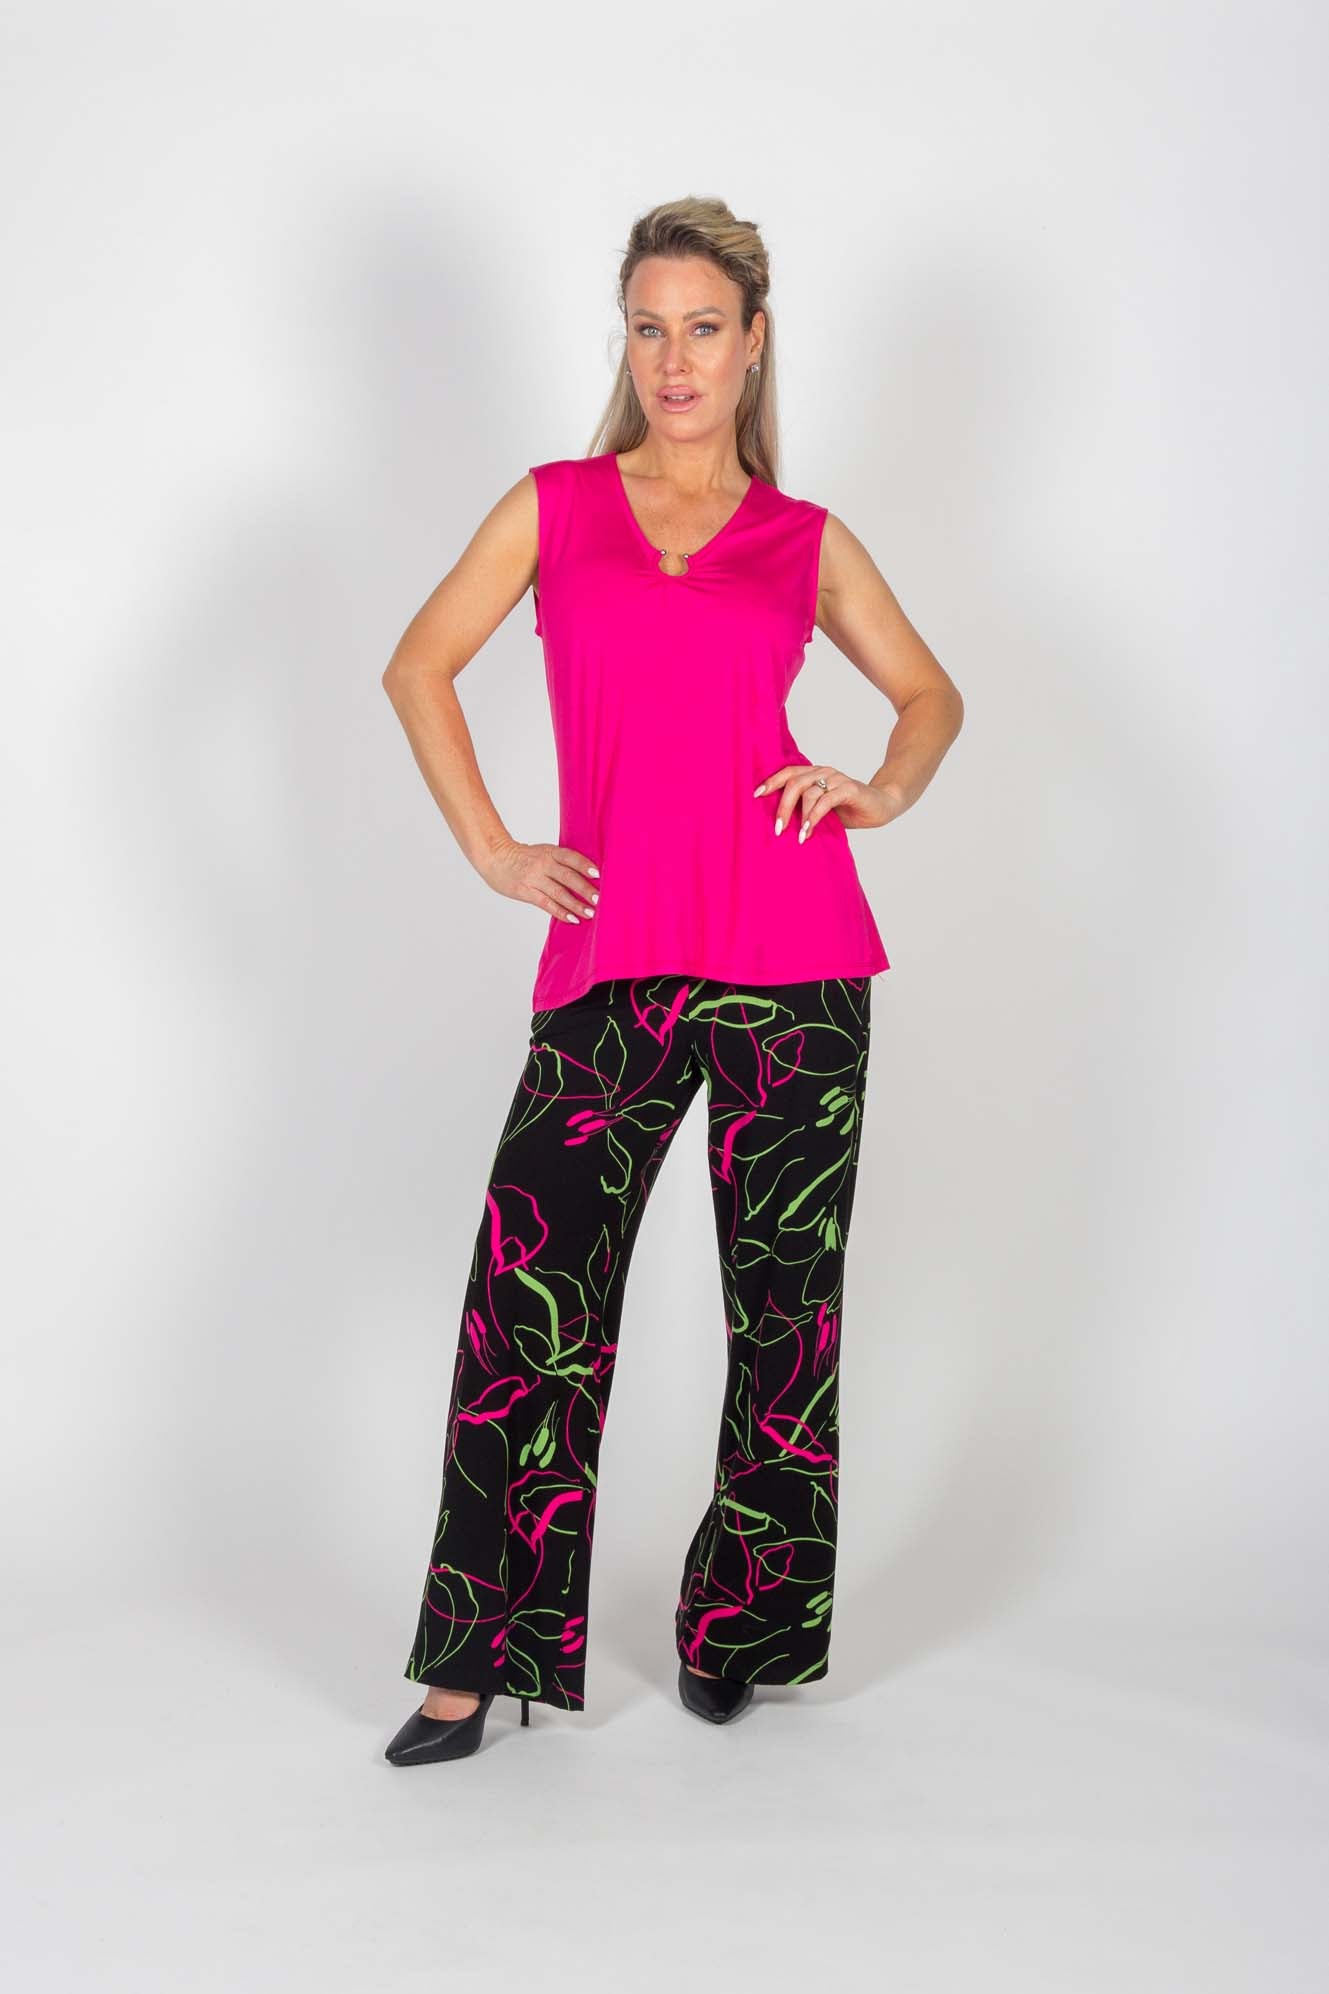 A woman wearing the Clarisse Pants by Pure Essence in Black/Pink/Green with a pink top standing in front of a white background